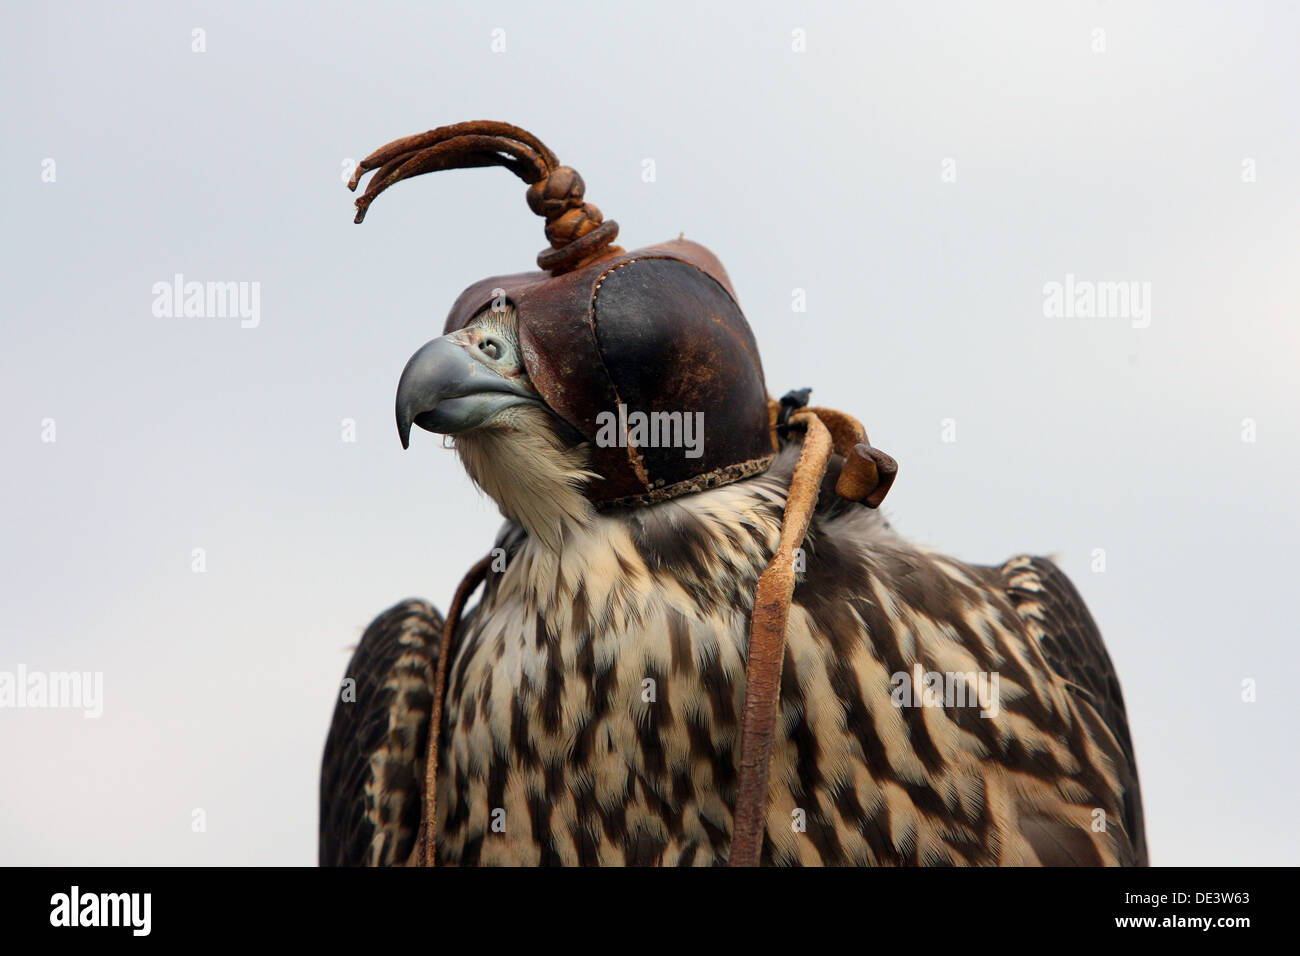 Hannover, Germany, Saker Falcon carries a leather hood on his head Stock Photo